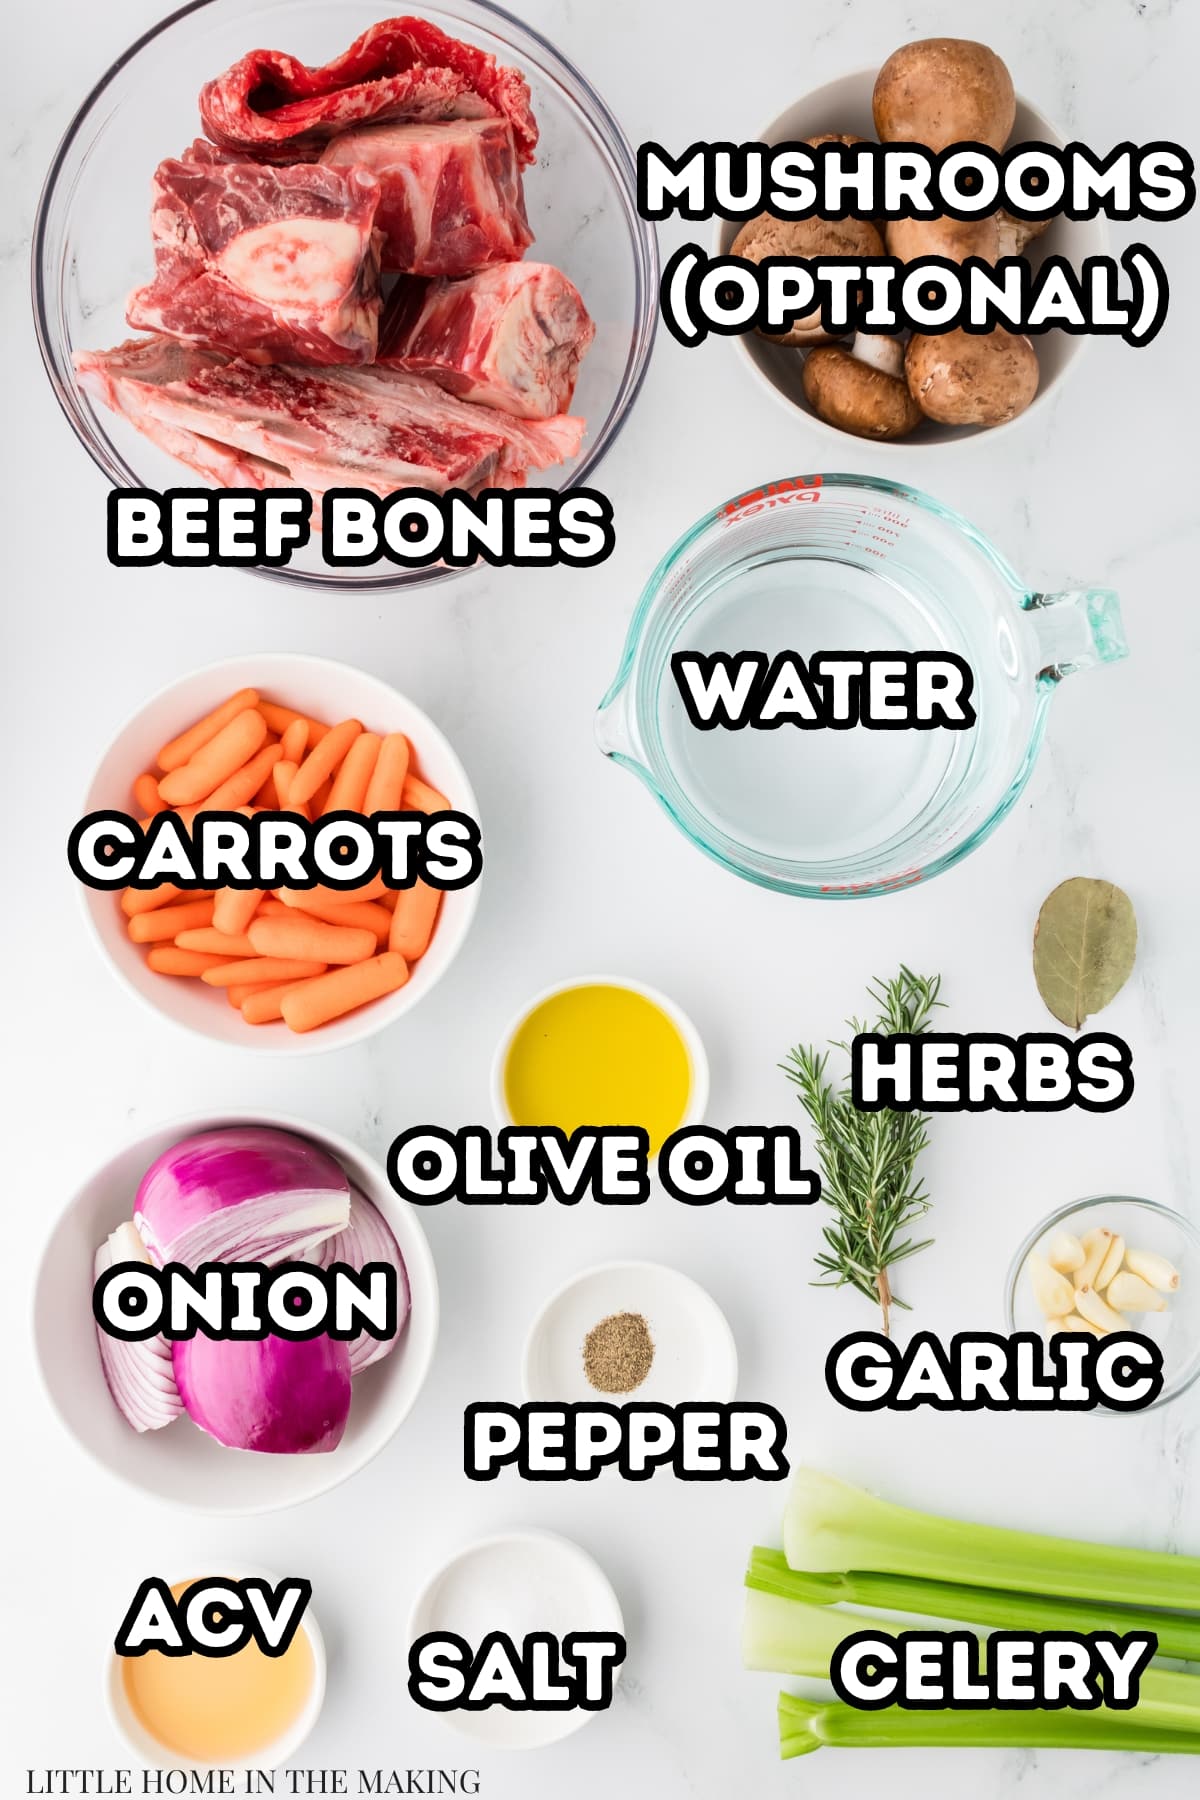 The ingredients needed to make broth: beef bones, mushrooms, carrots, onion, olive oil, herbs, and a few other ingredients.